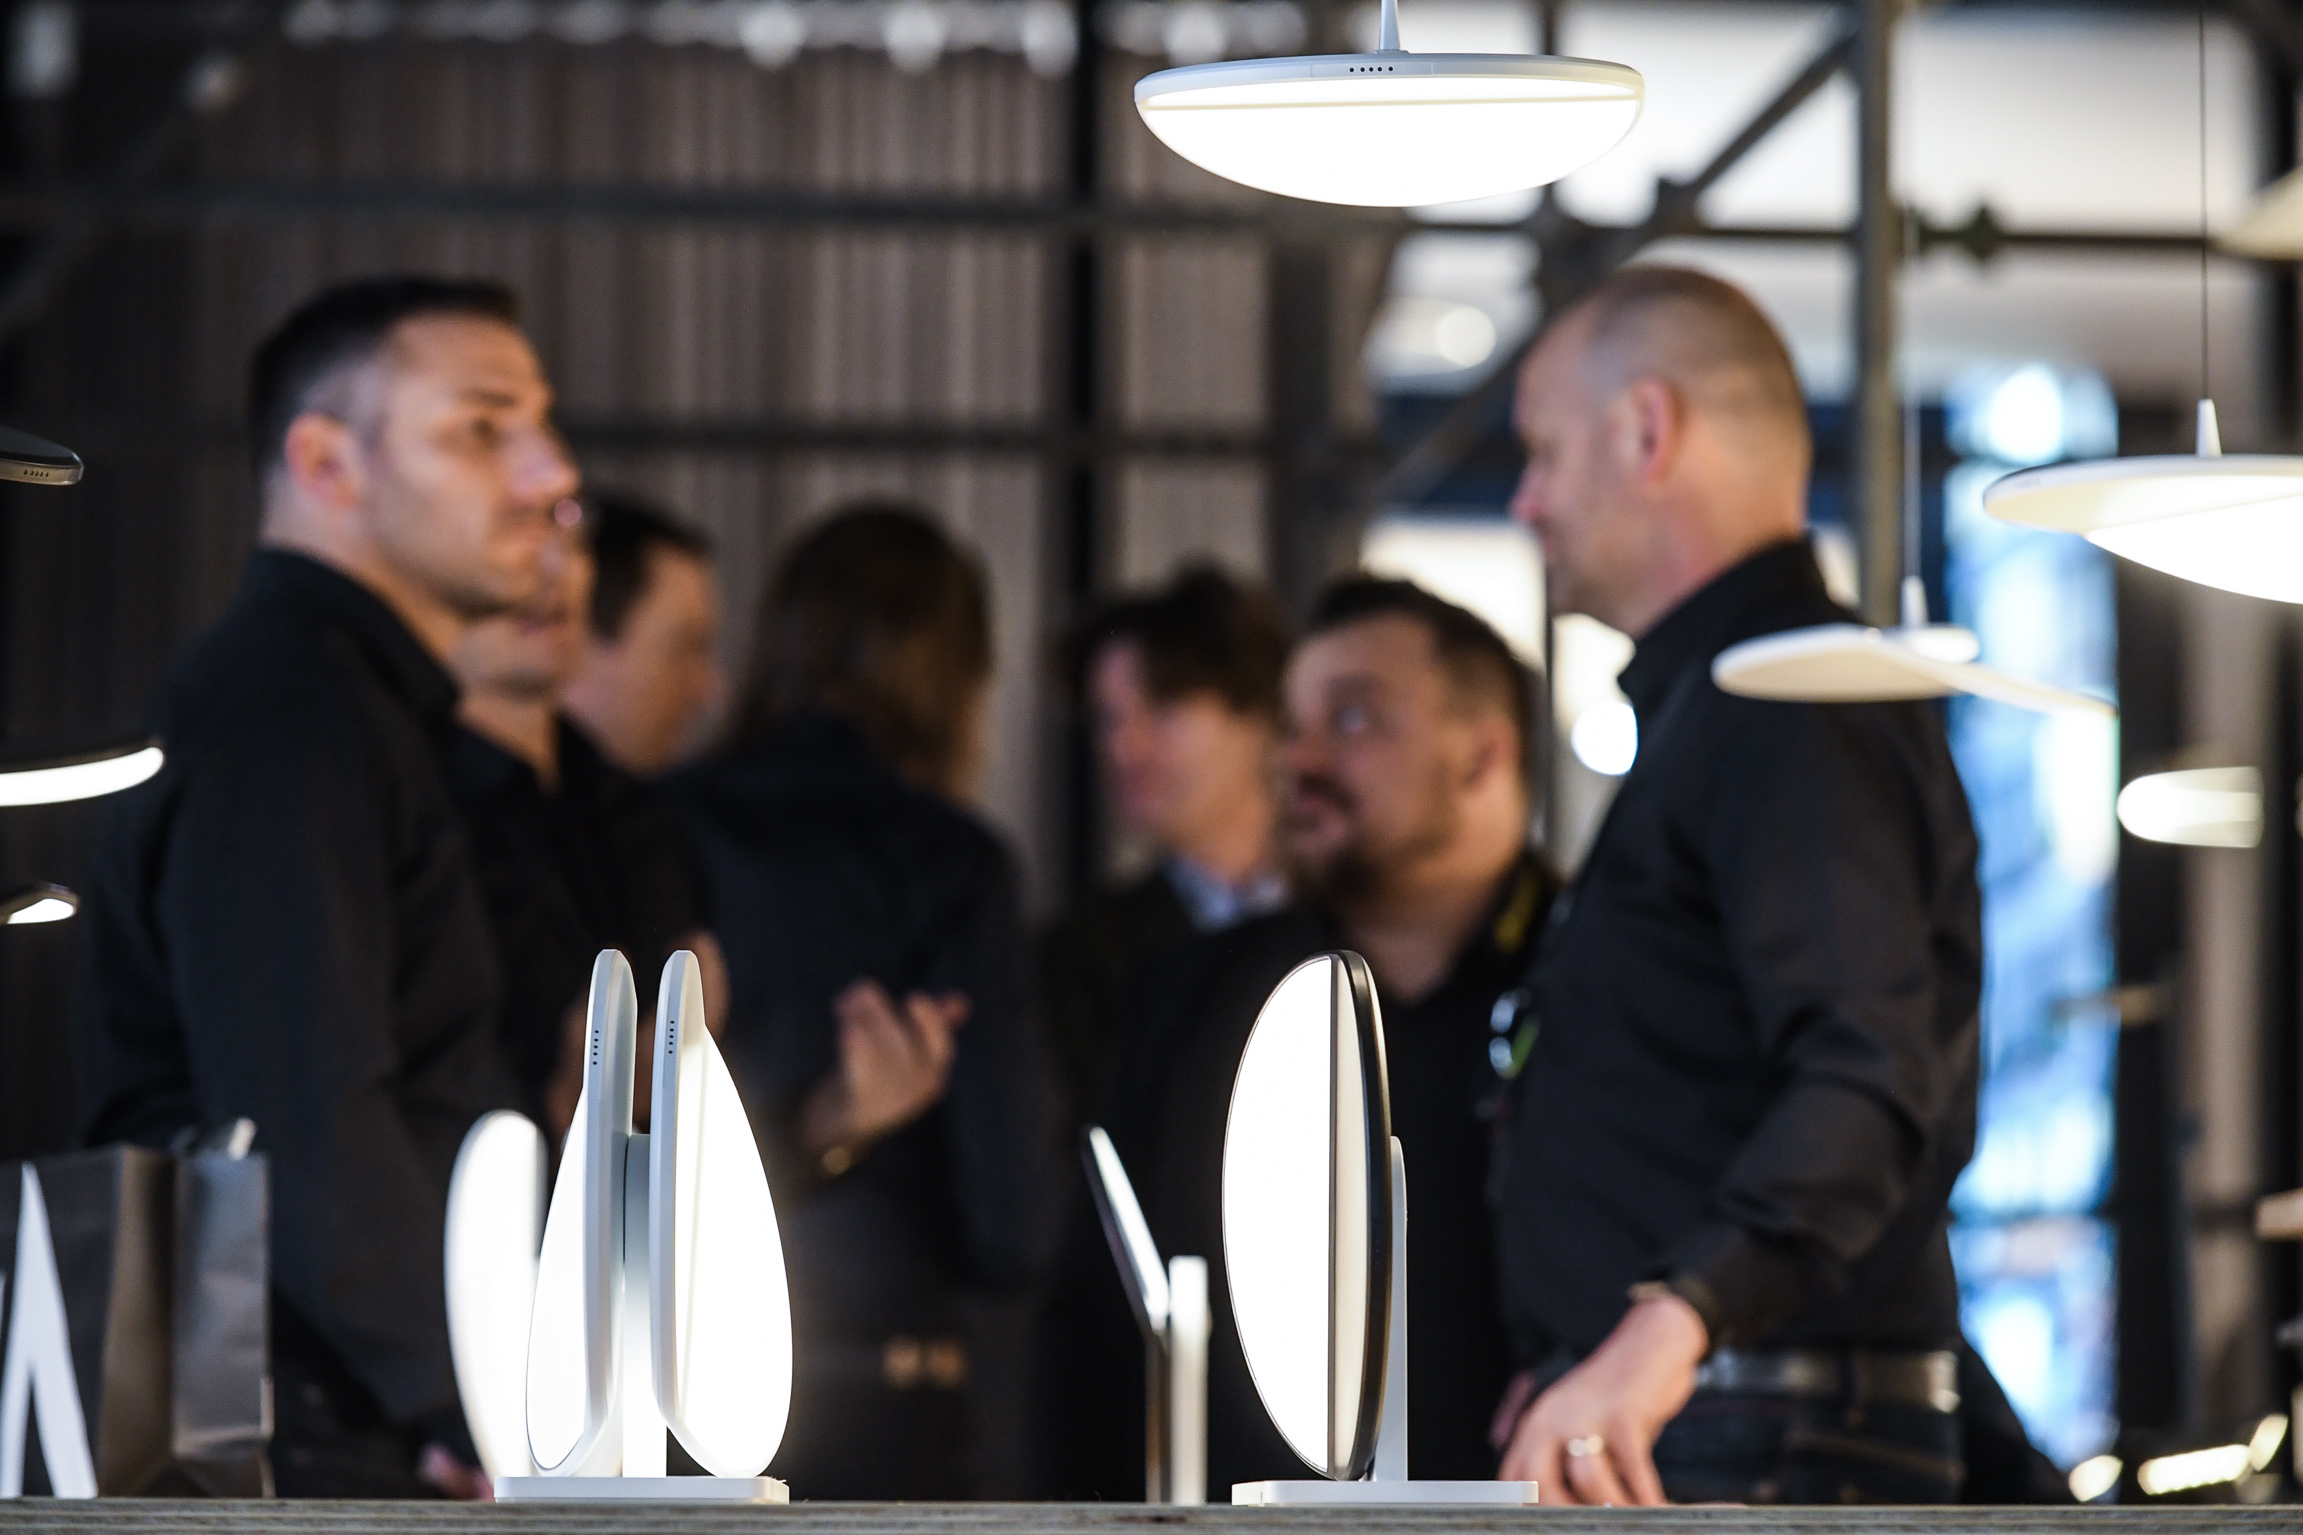 Tomorrow’s light is smart, portable, light and sustainable – as shown by luminaire designs at Light + Building 2020.